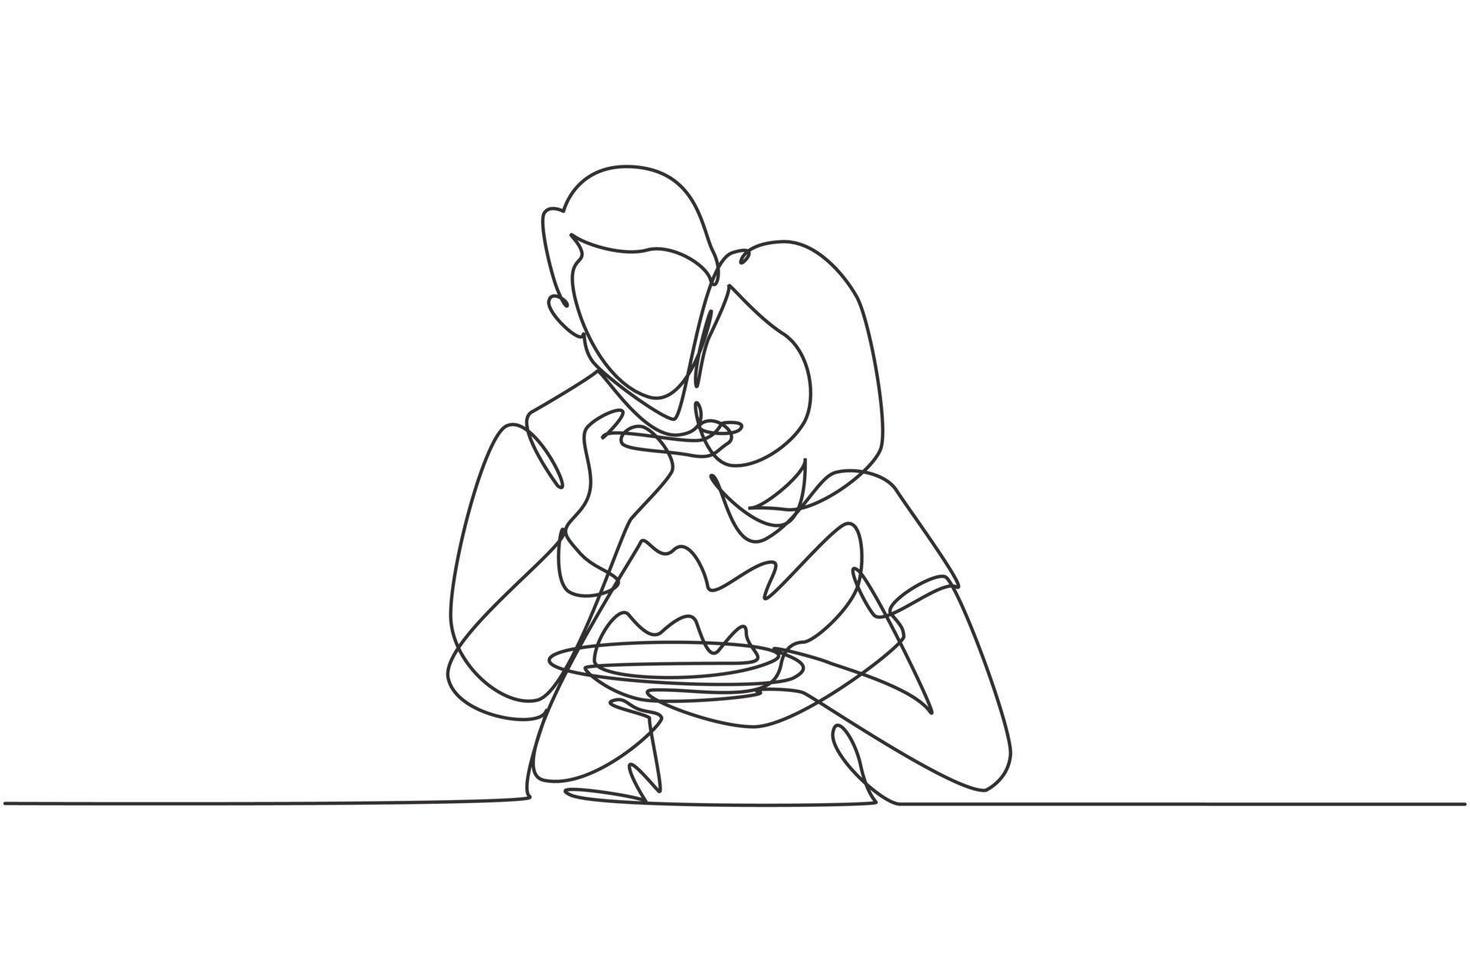 Single one line drawing romantic man feeding wife for breakfast. Celebrate wedding anniversaries and enjoy romantic moment at home. Modern continuous line draw design graphic vector illustration